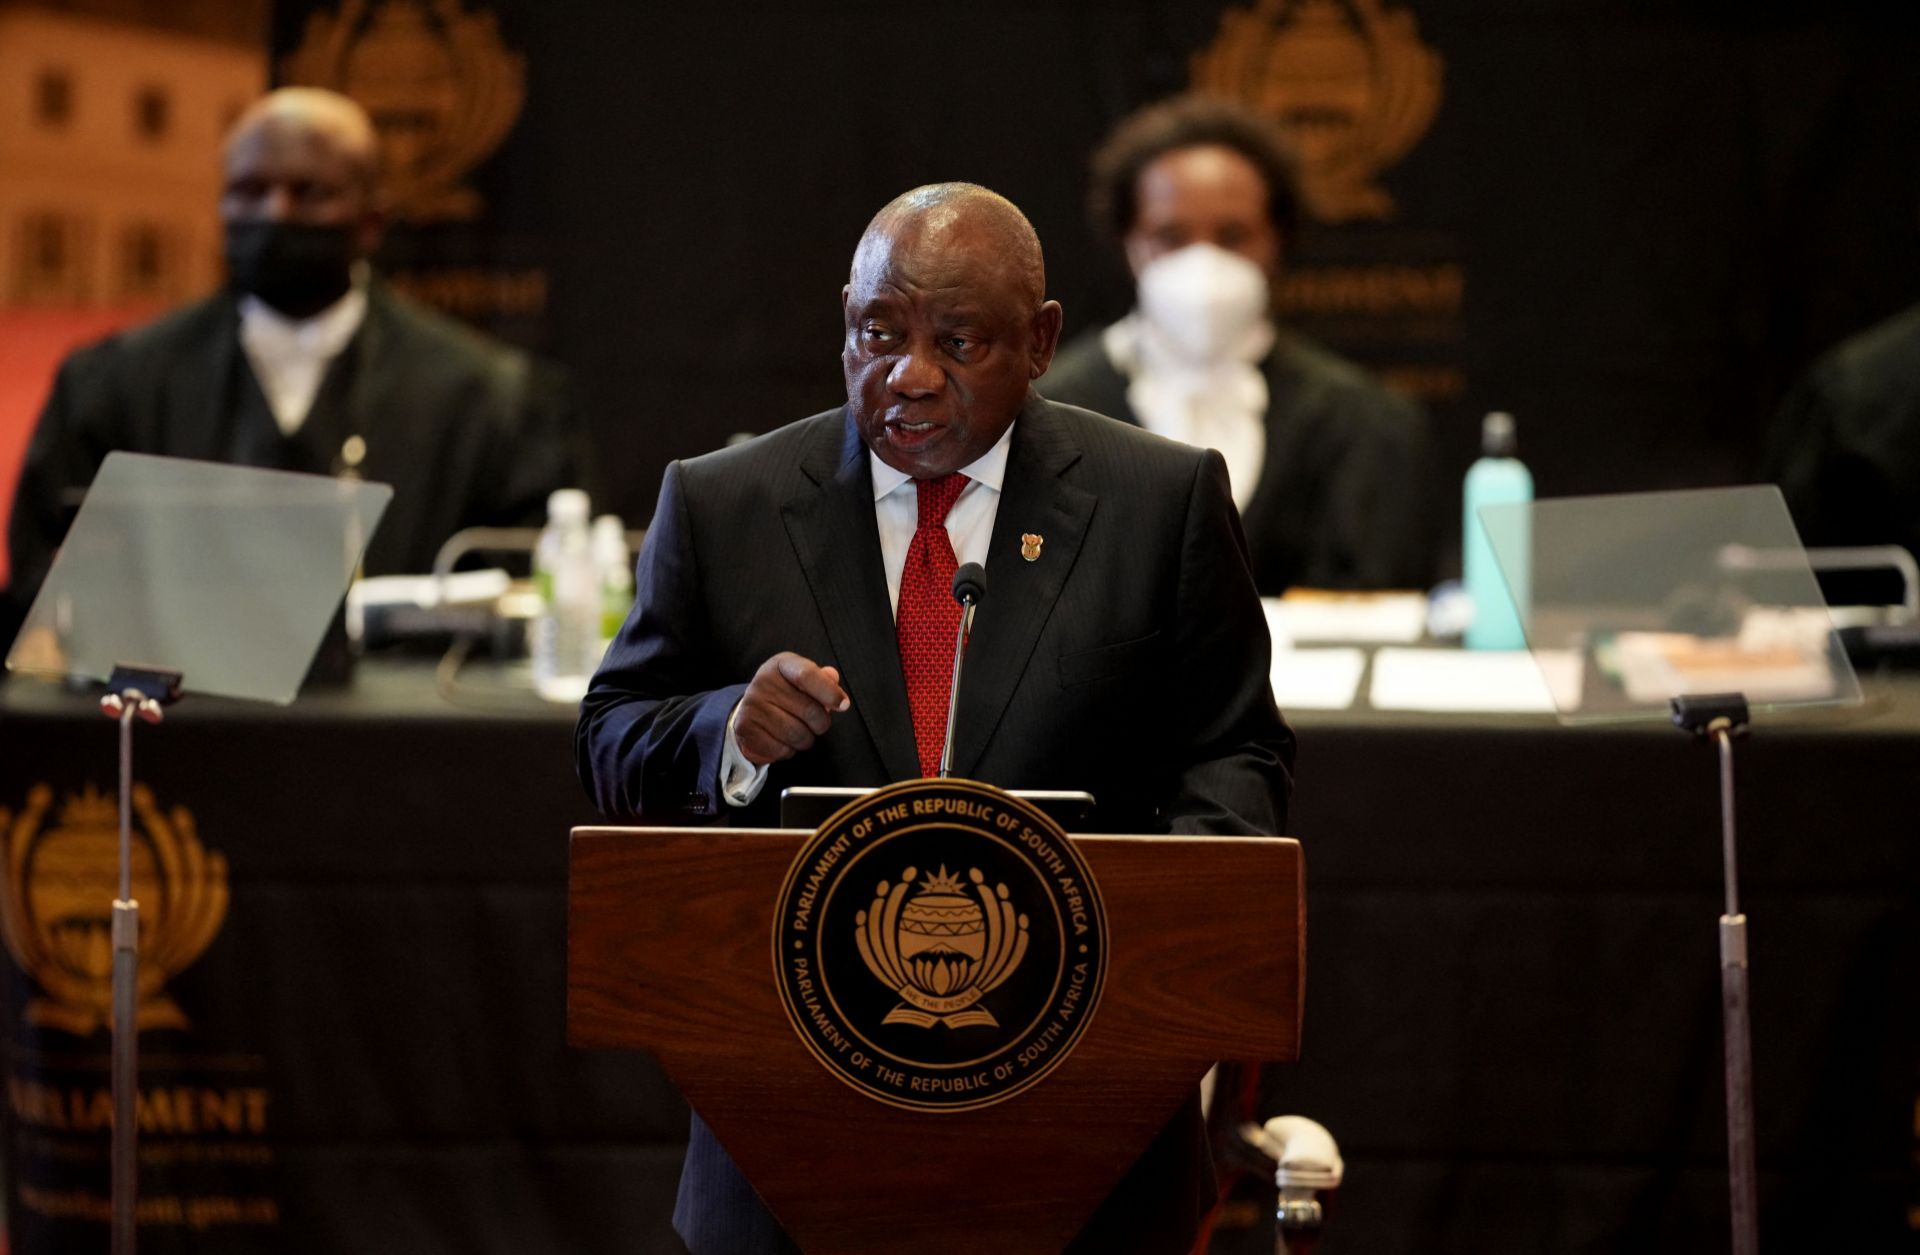 South African President Cyril Ramaphosa delivers his State of the Nation address in Cape Town, South Africa, on Feb. 10, 2022.